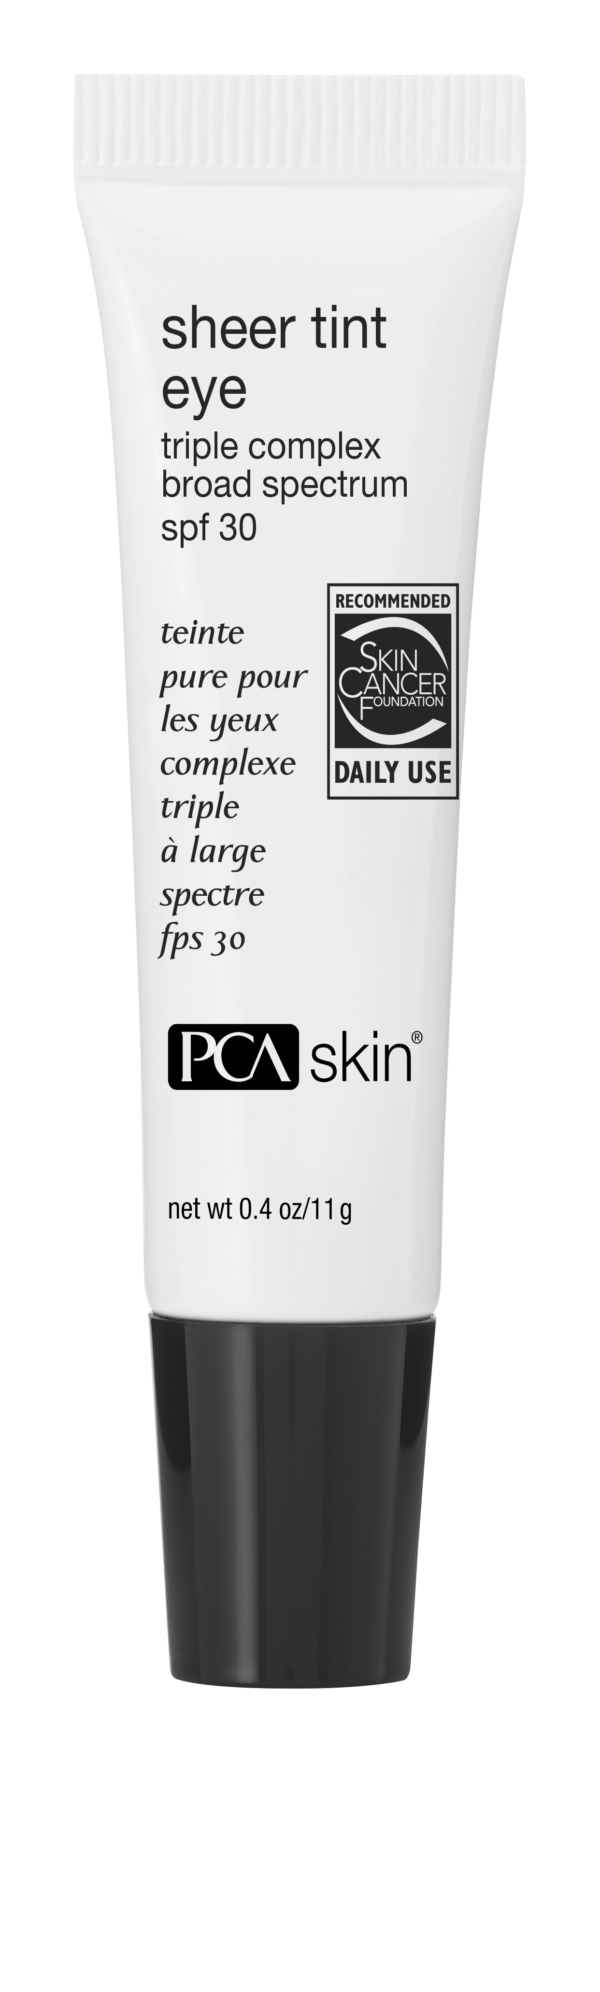 PCA_Products_Sheer_Tint_Eye_Triple_Complex_Broad_Spectrum